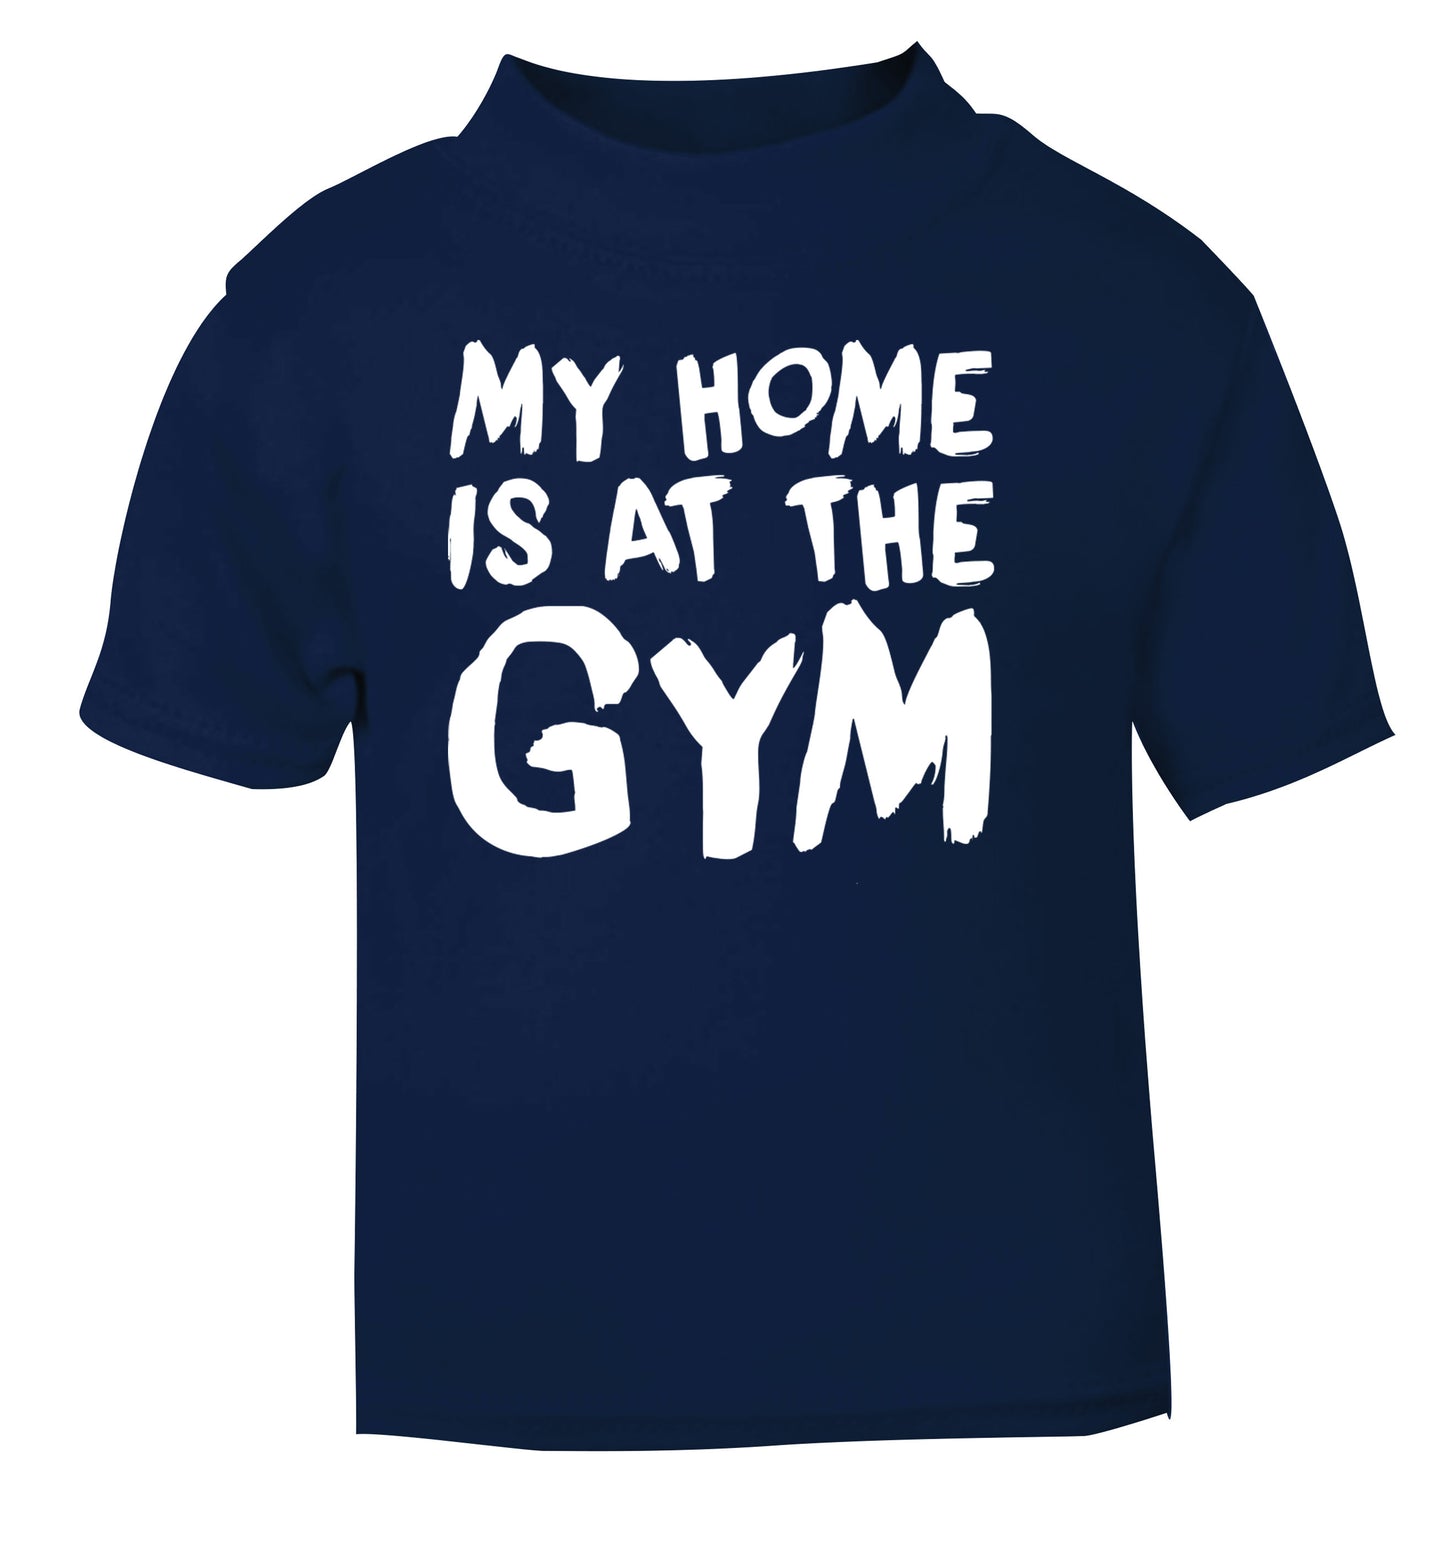 My home is at the gym navy Baby Toddler Tshirt 2 Years